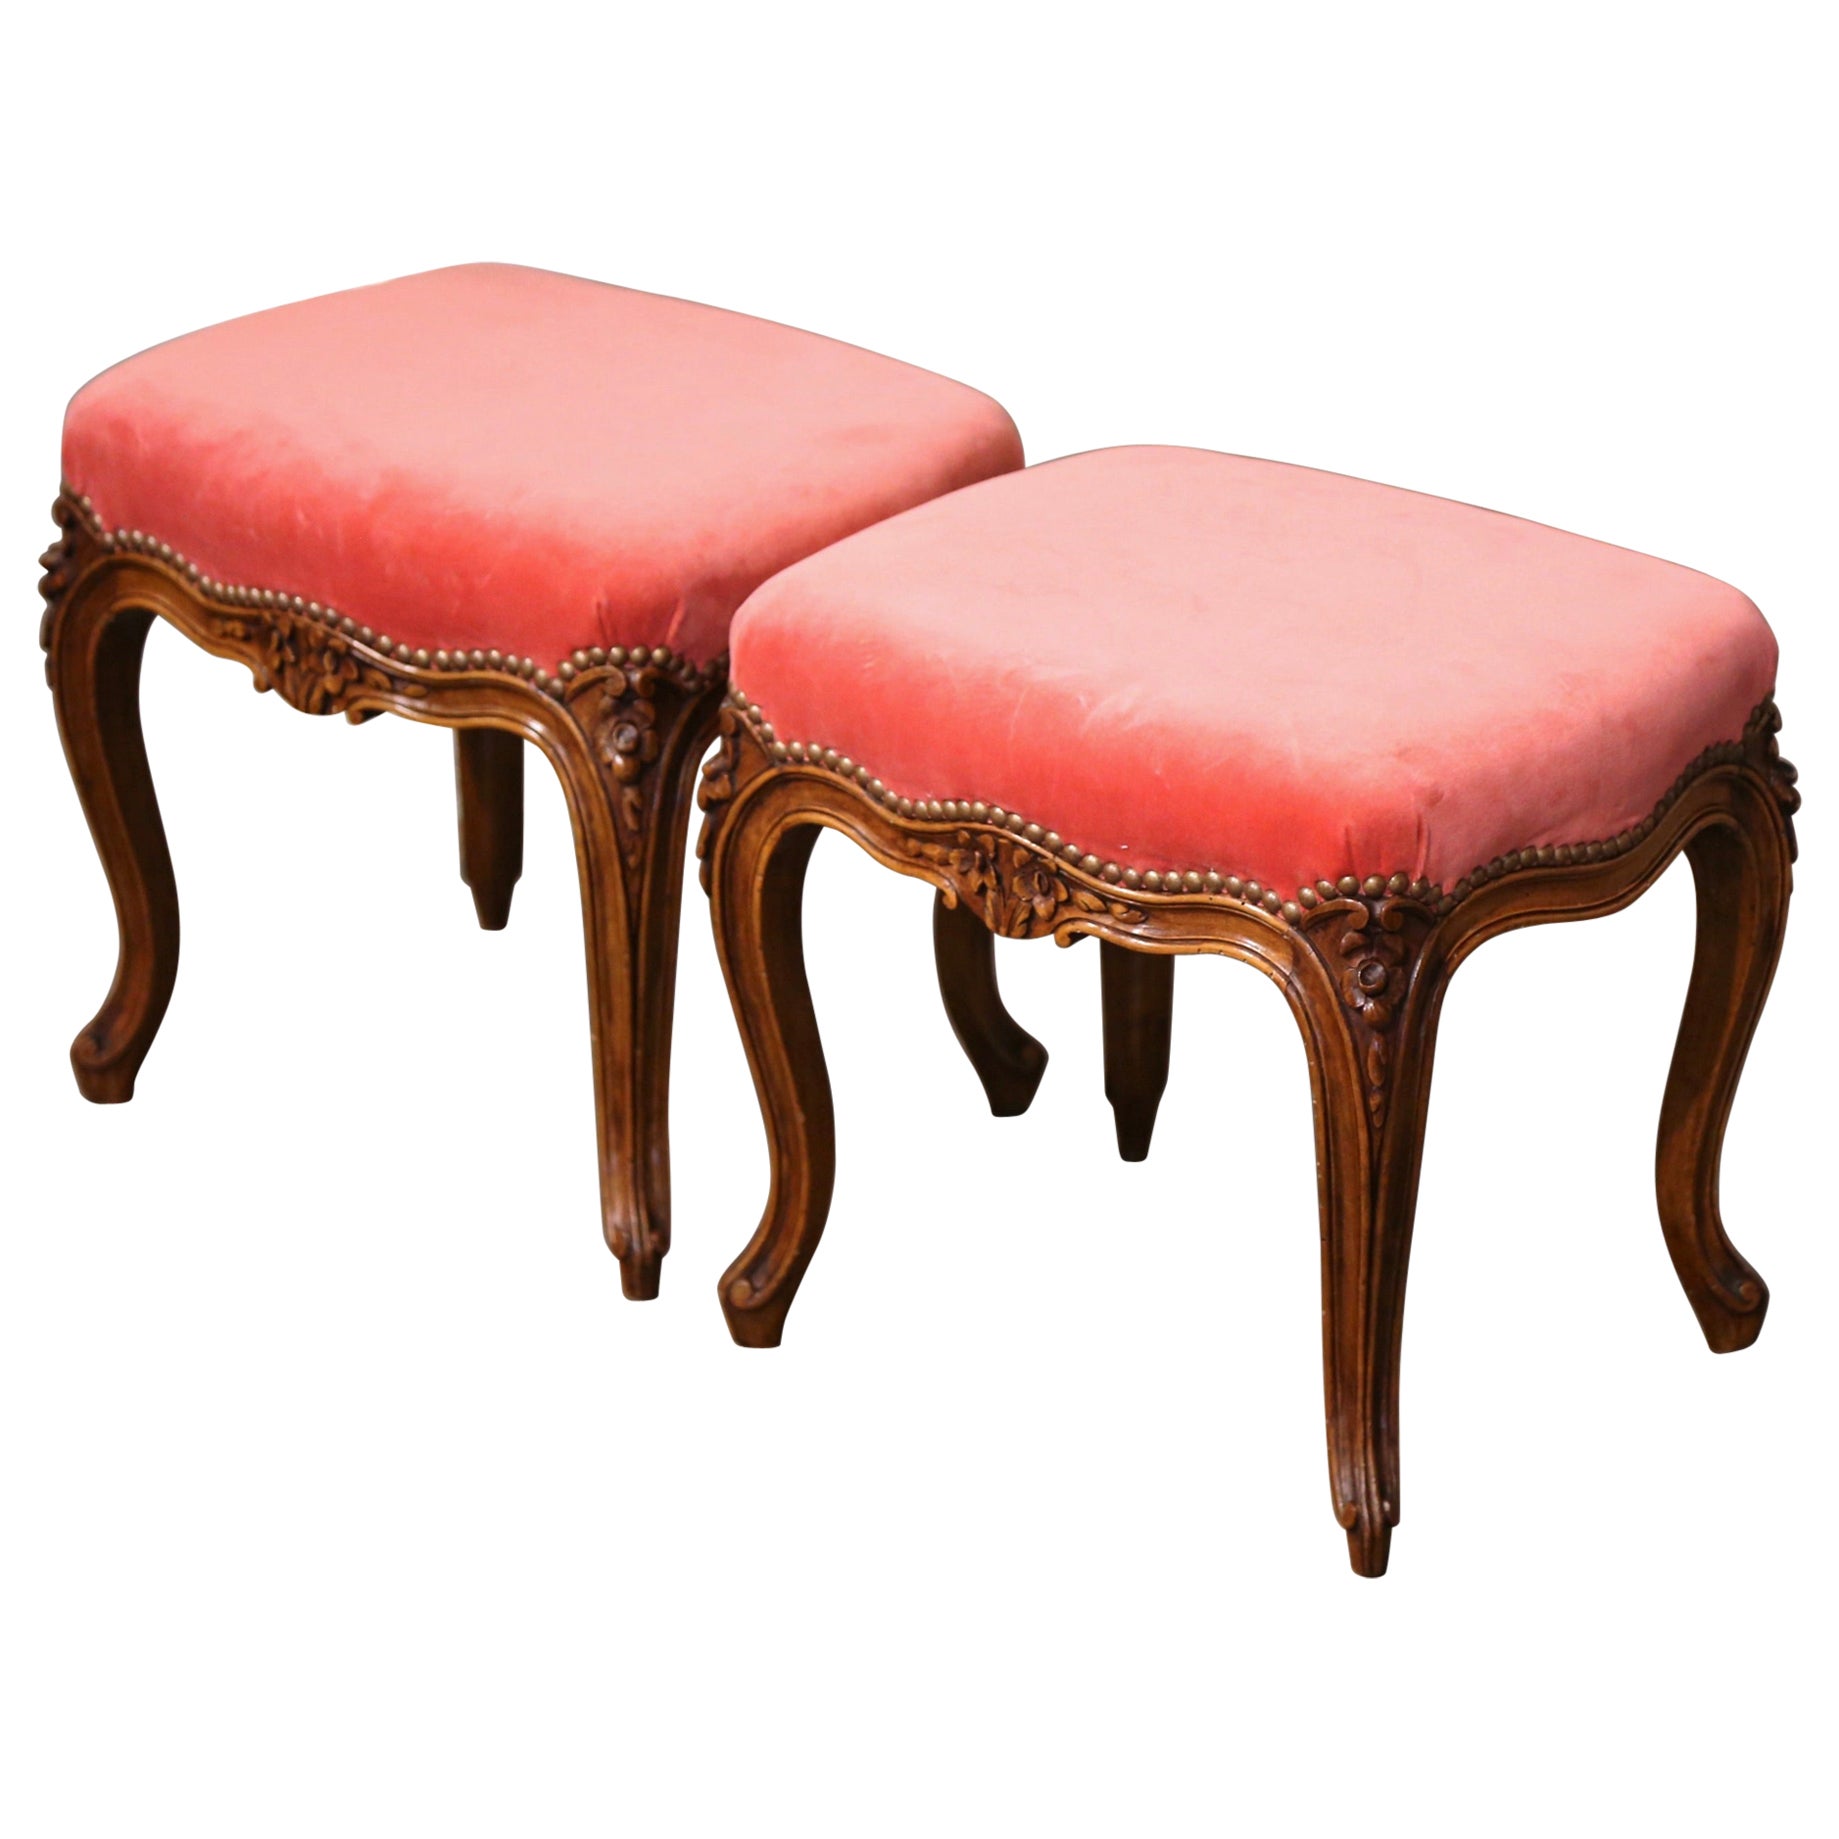 Pair of Mid-Century French Louis XV Carved Walnut Stools with Velvet Upholstery